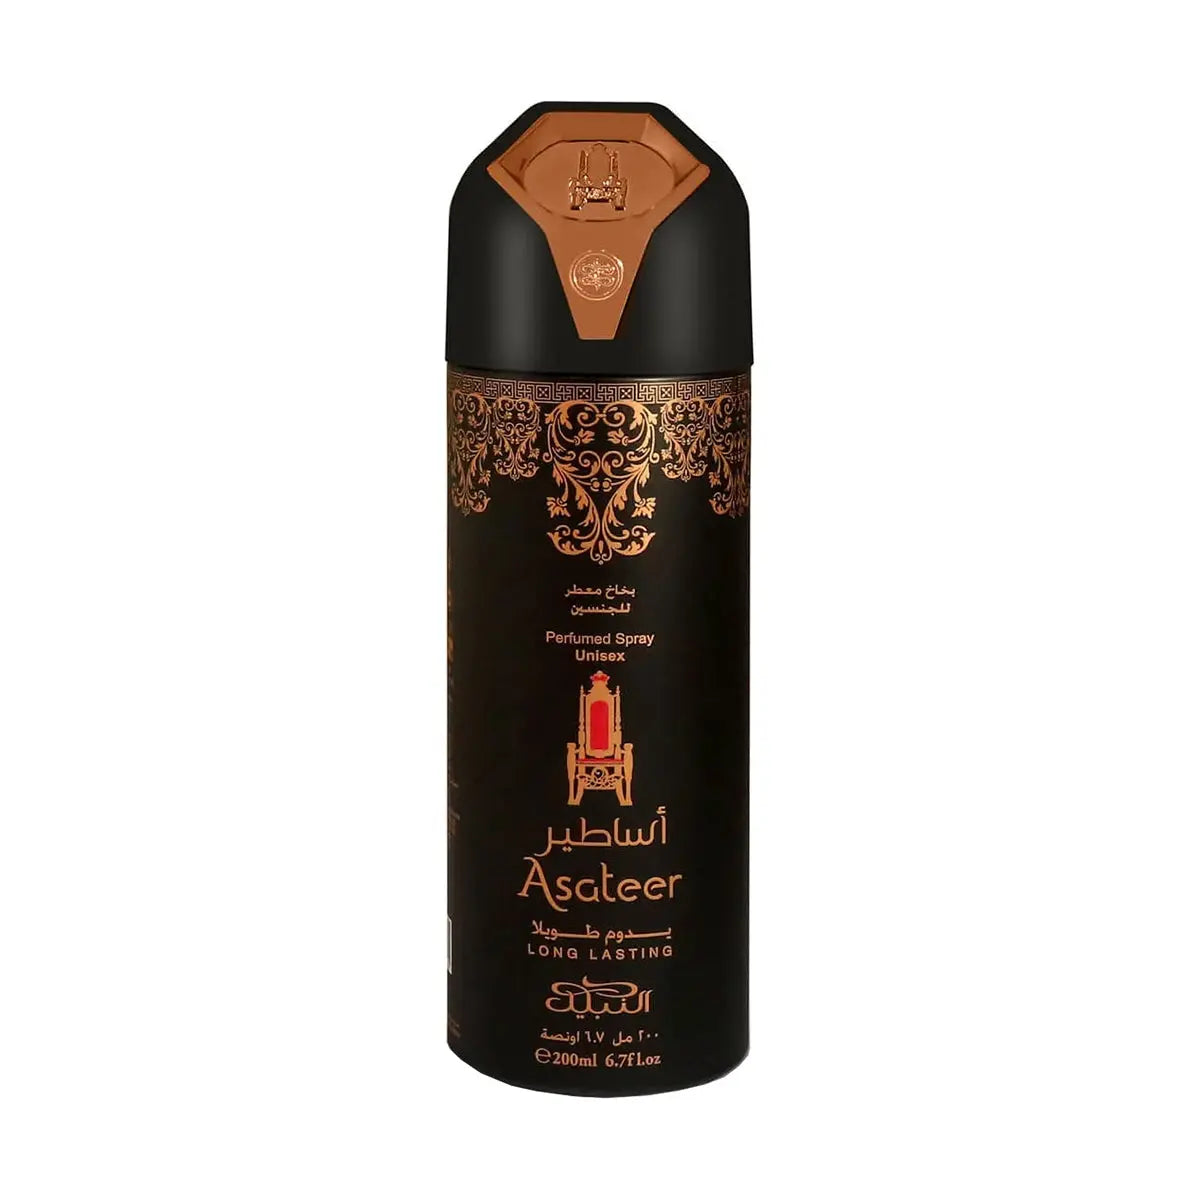  A product image of a cylindrical perfume spray bottle. The design is ornate with a dark background and golden arabesque patterns and inscriptions. The label includes the text "Perfumed Spray Unisex" and "Asateer" prominently displayed in both Arabic and Latin scripts, indicating a unisex fragrance. Additional details include "Long Lasting" and the brand "Nabeel". The size is marked as "200ml 6.7fl.oz".